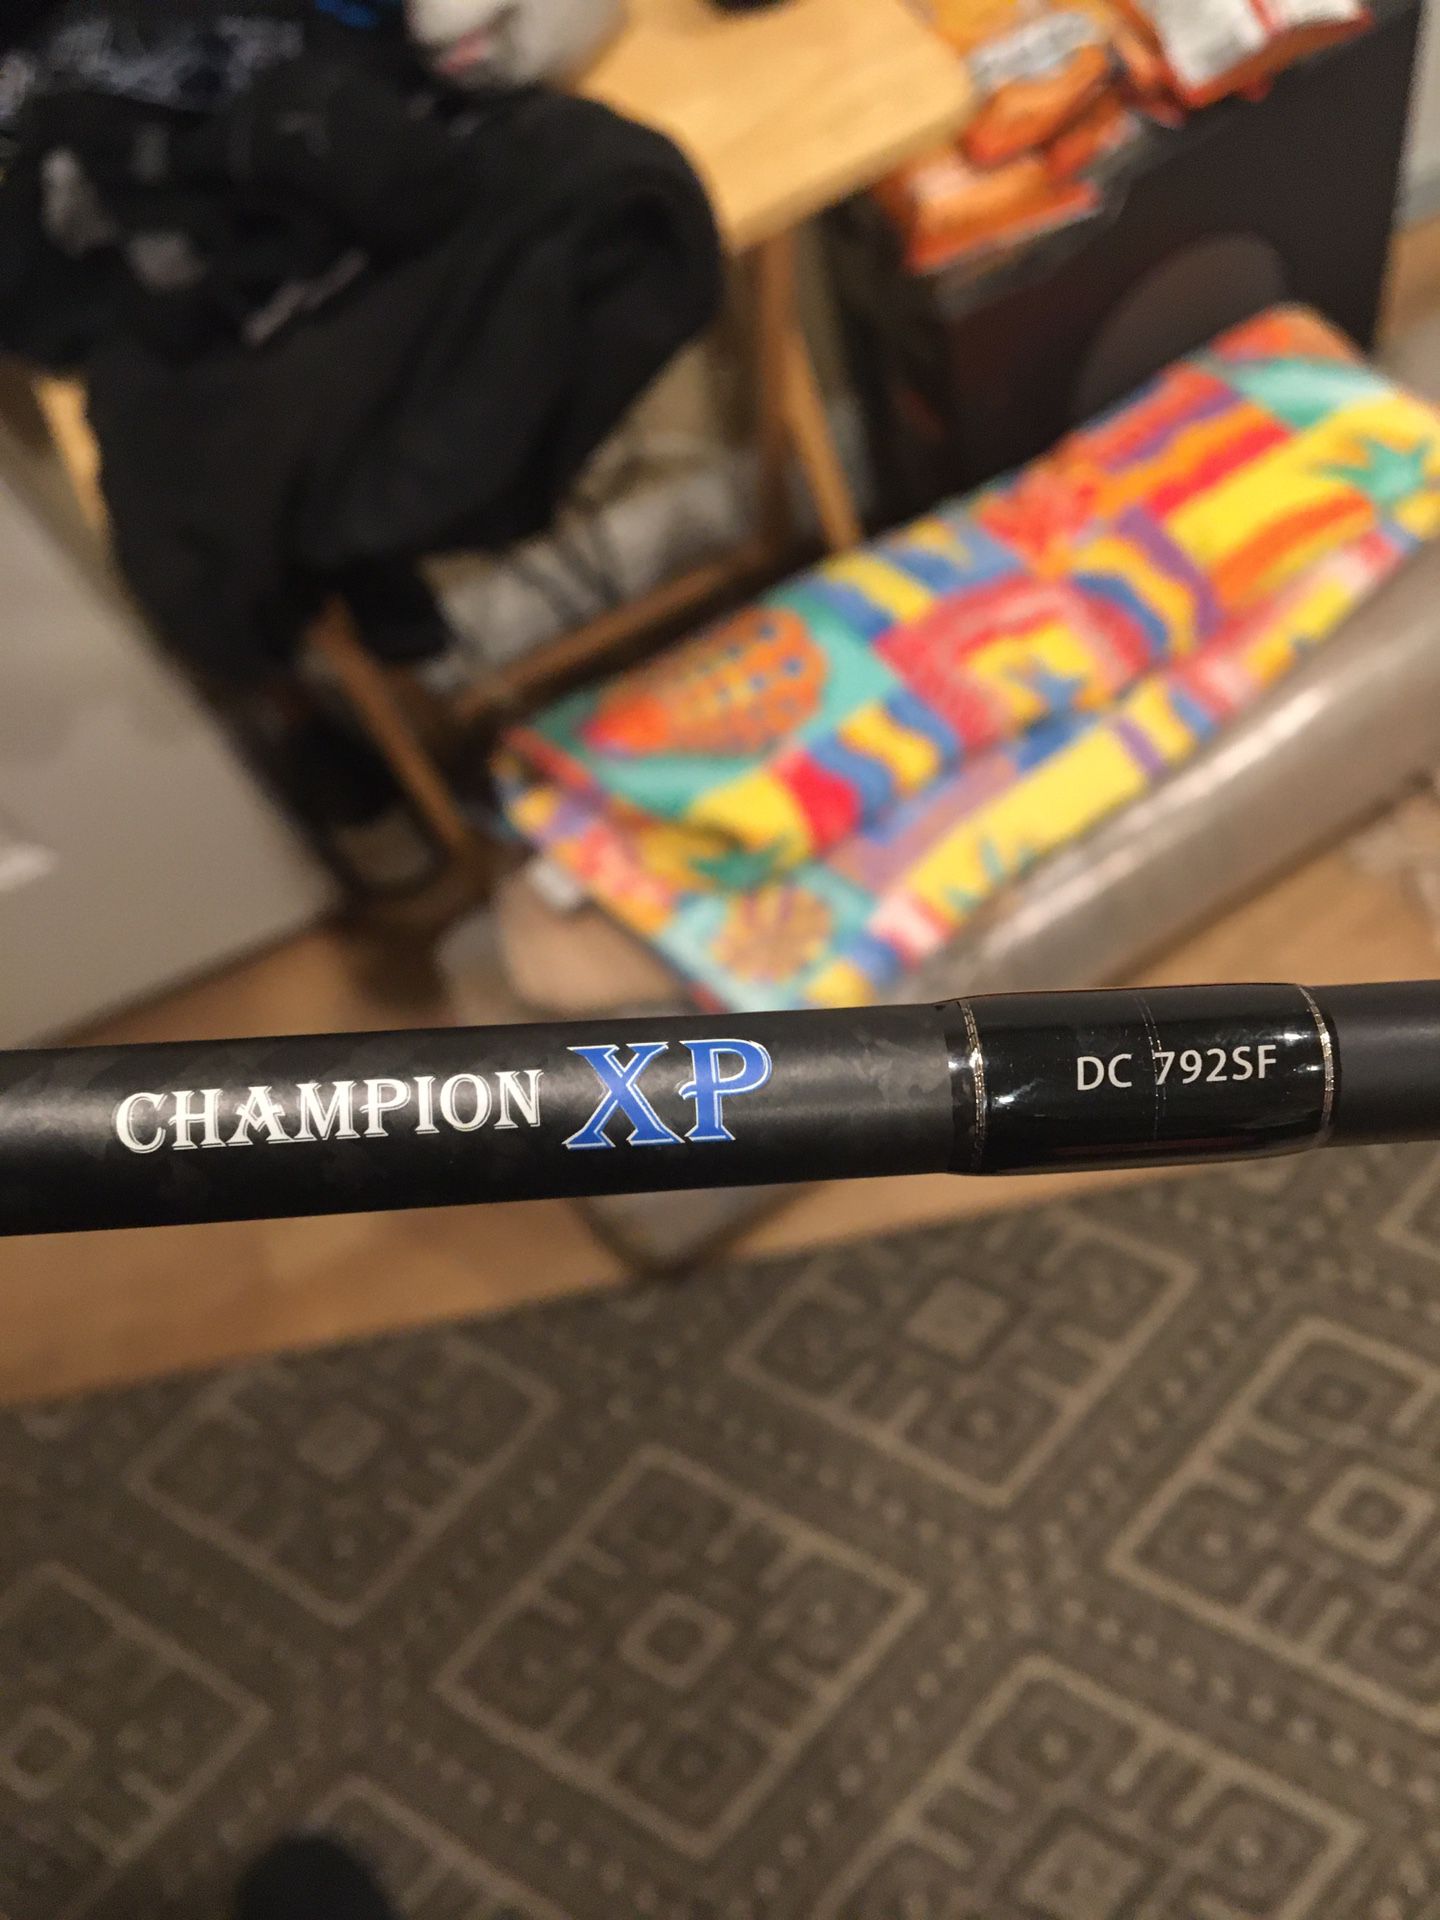 Dobyns Champion Xp 792sf Spinning Rod 